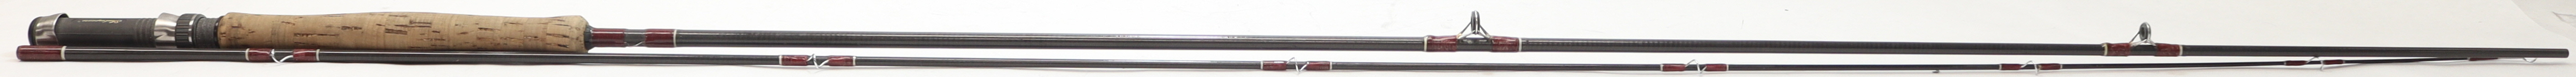 Shakespeare - GFY 90-67 9'0'' 6/7 Line (98% Graphite Fly Rod) 